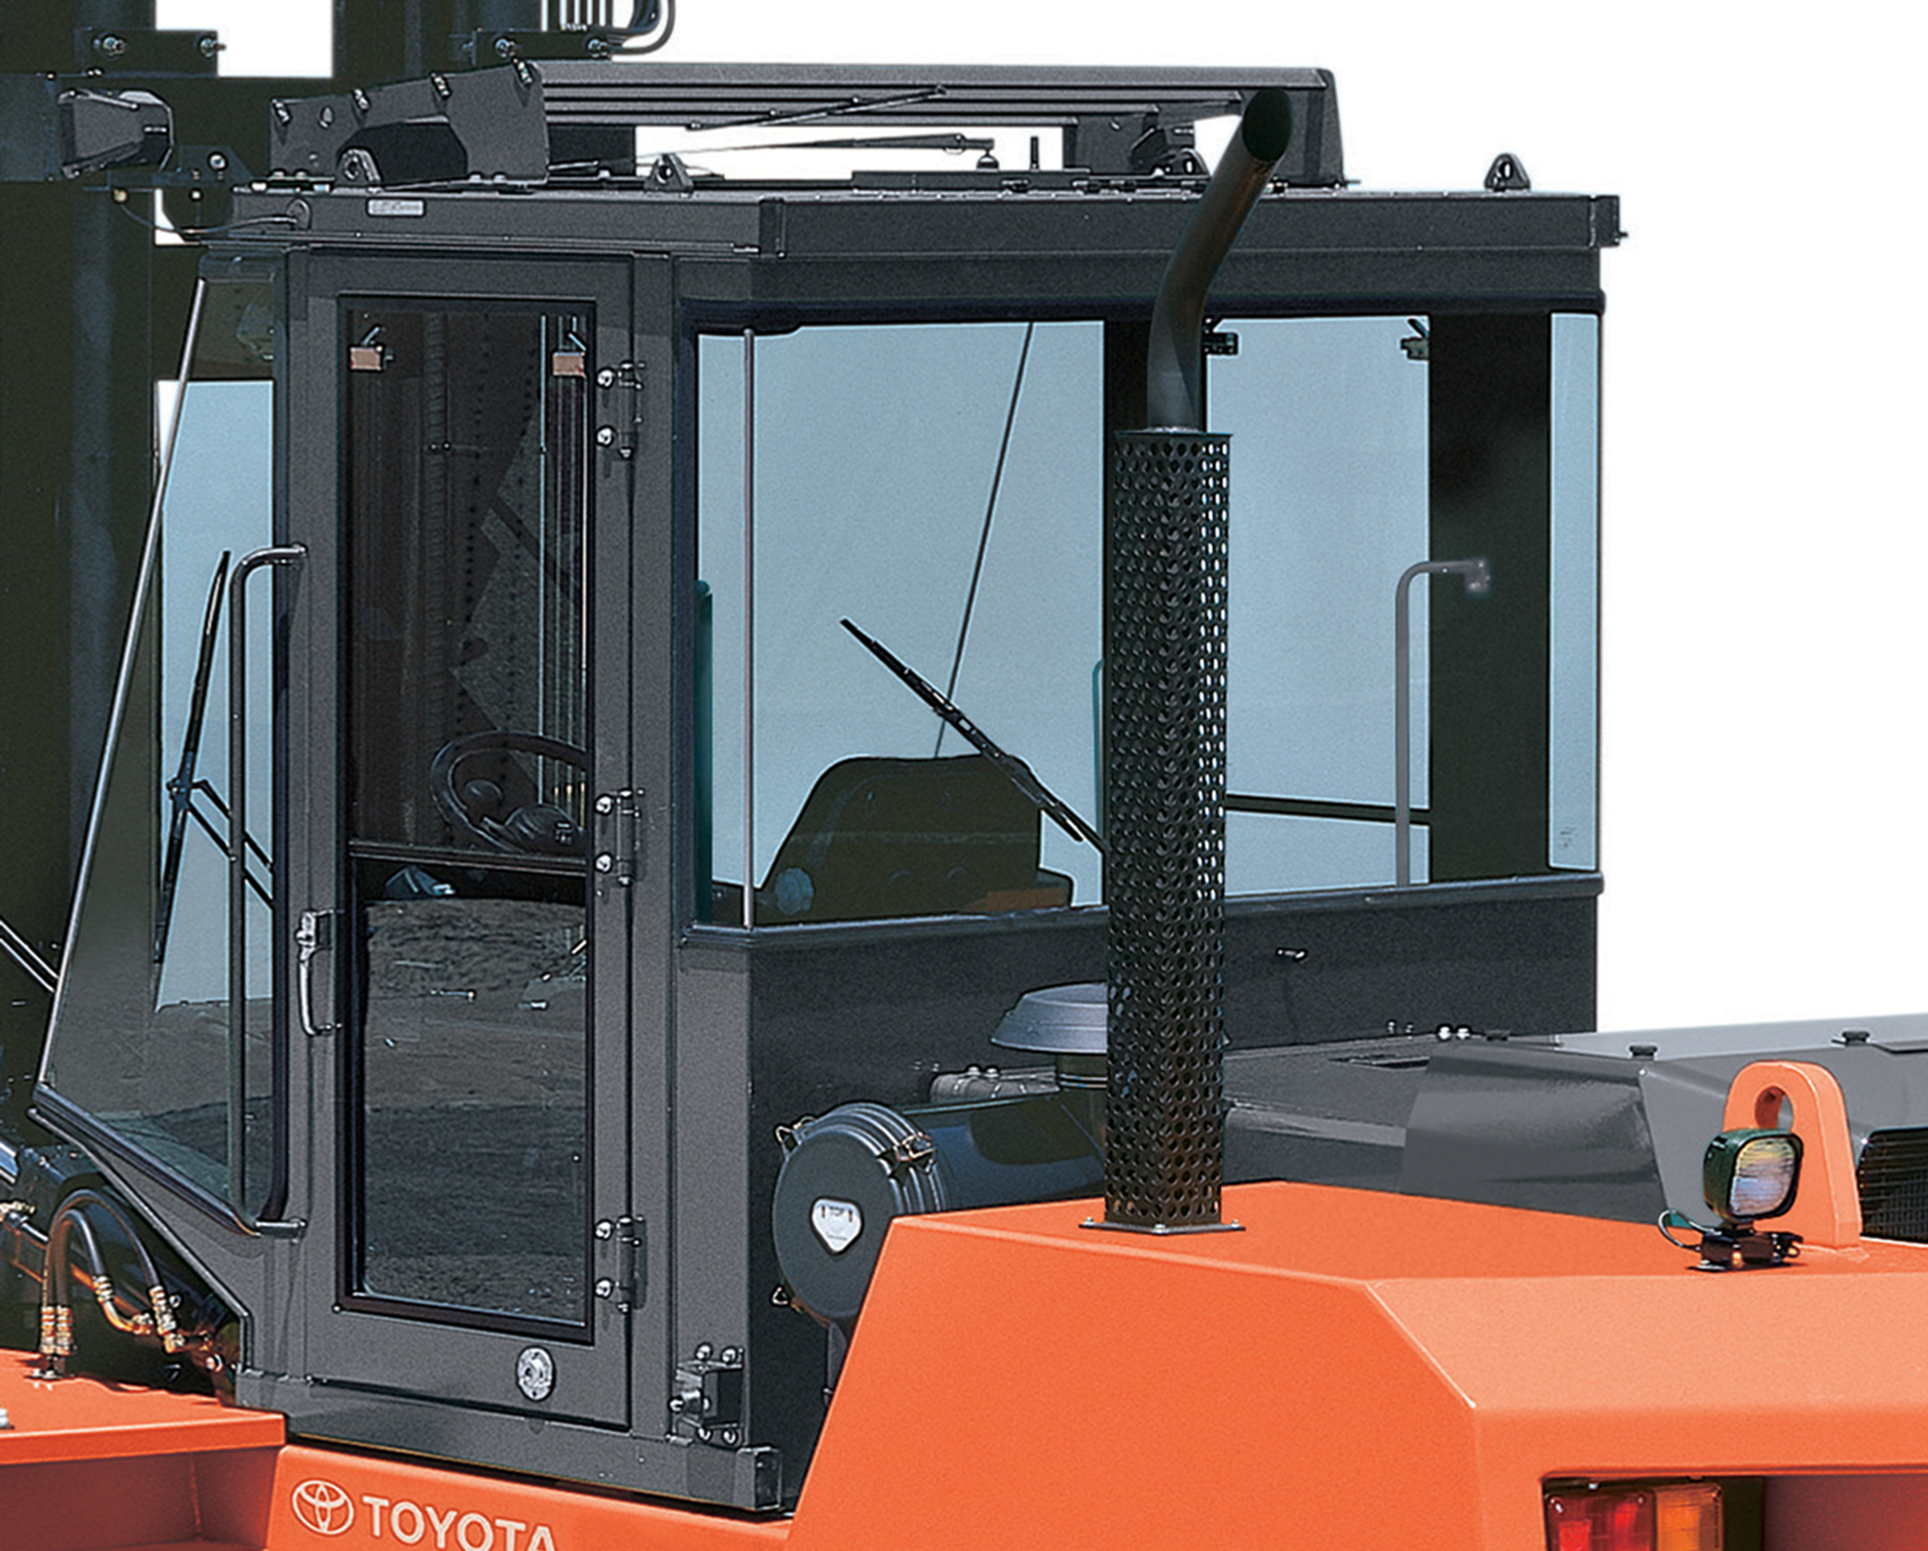 Close-up of enclosed cab for Toyota's High-Capacity IC Pneumatic forklift.